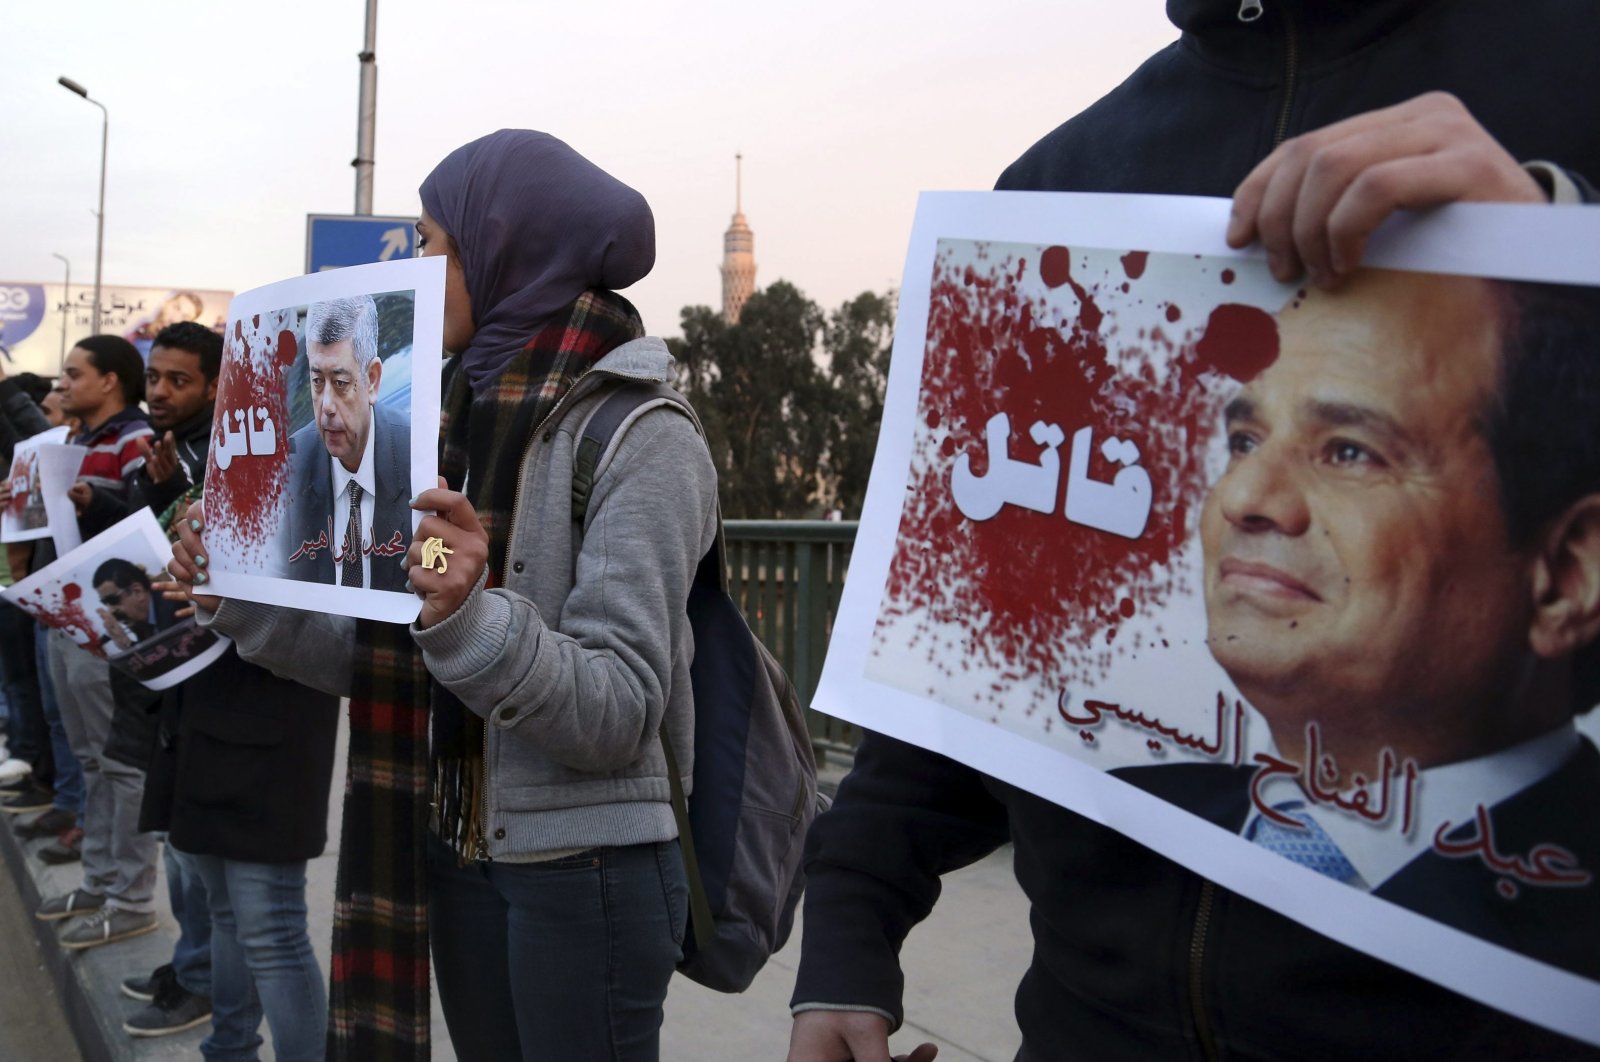 Protesters hold posters of Egyptian Interior Minister Mohamed Ibrahim (L) and President Abdel-Fattah el-Sissi with the word "Killer" on them during a silent protest on a bridge in Cairo, Egypt, Feb. 14, 2015. (Reuters Photo)